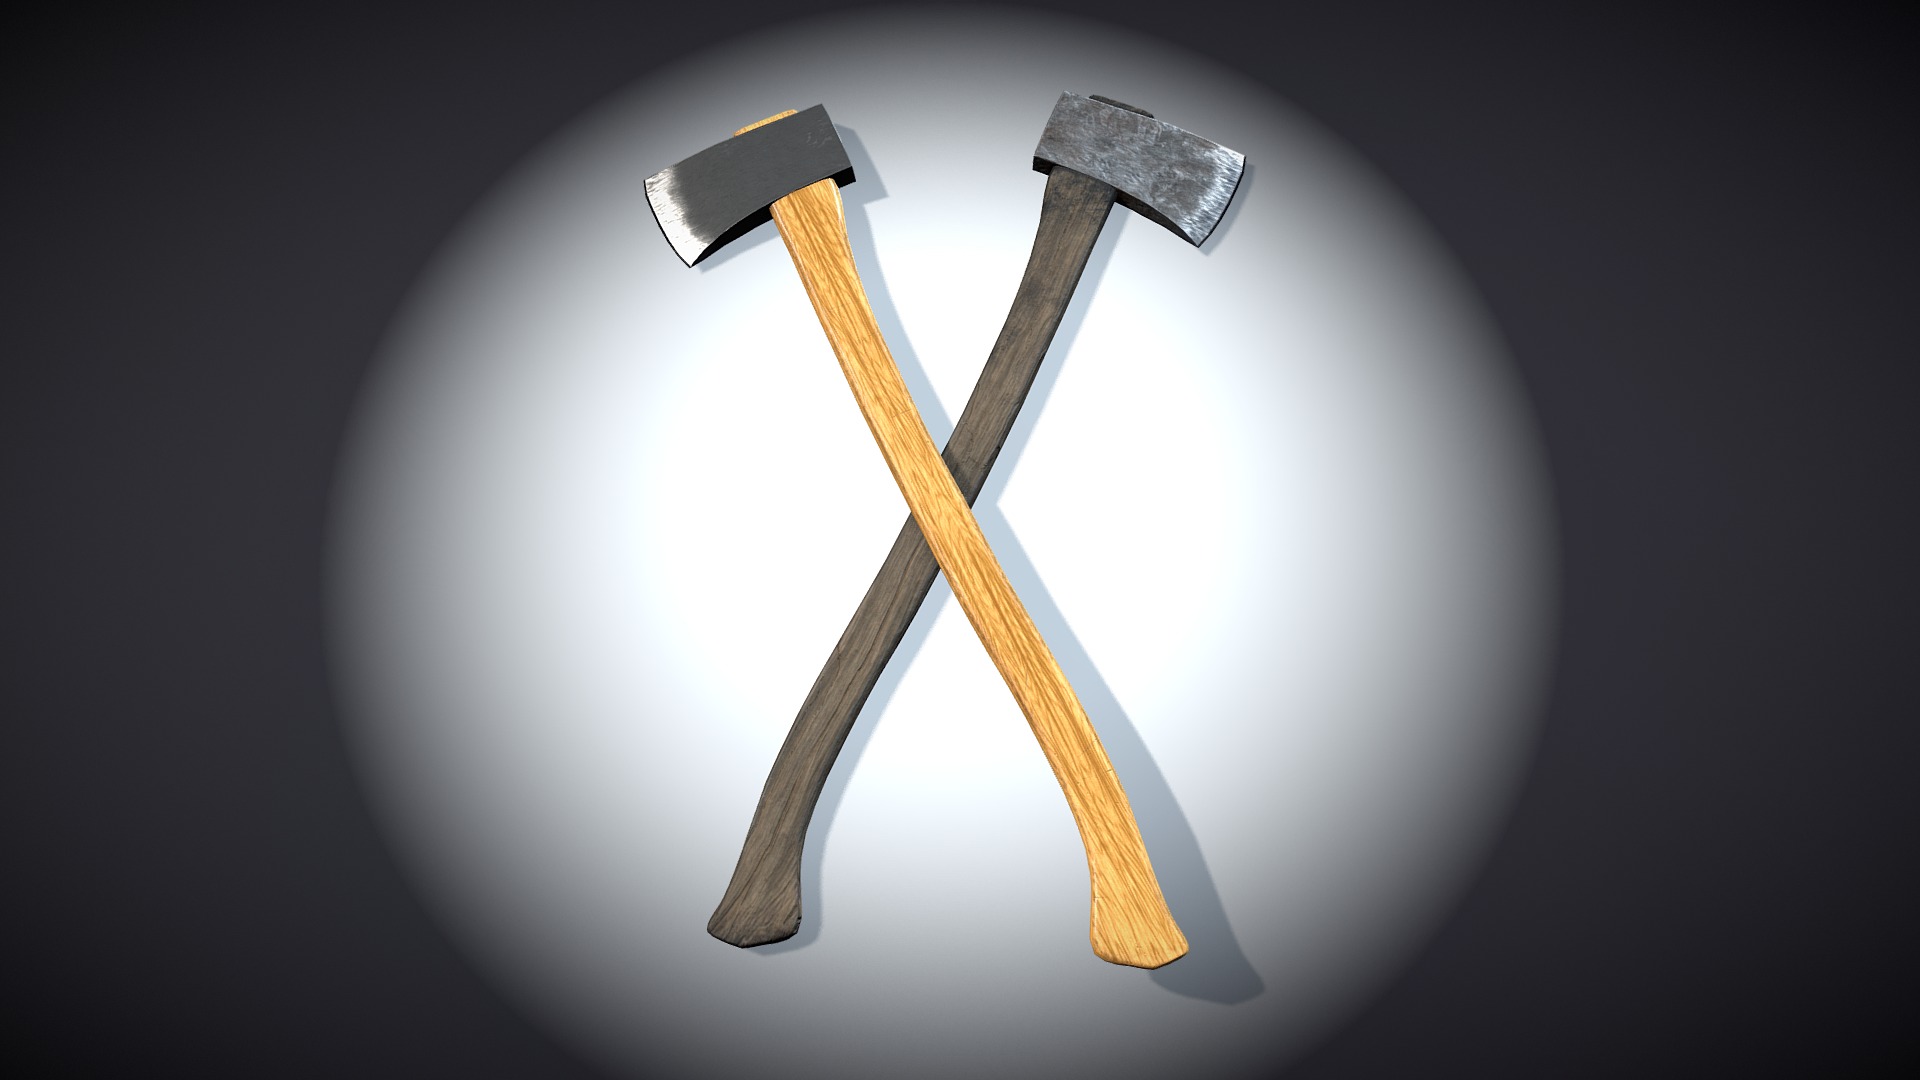 3D model Axe - This is a 3D model of the Axe. The 3D model is about a wooden spoon on a white plate.